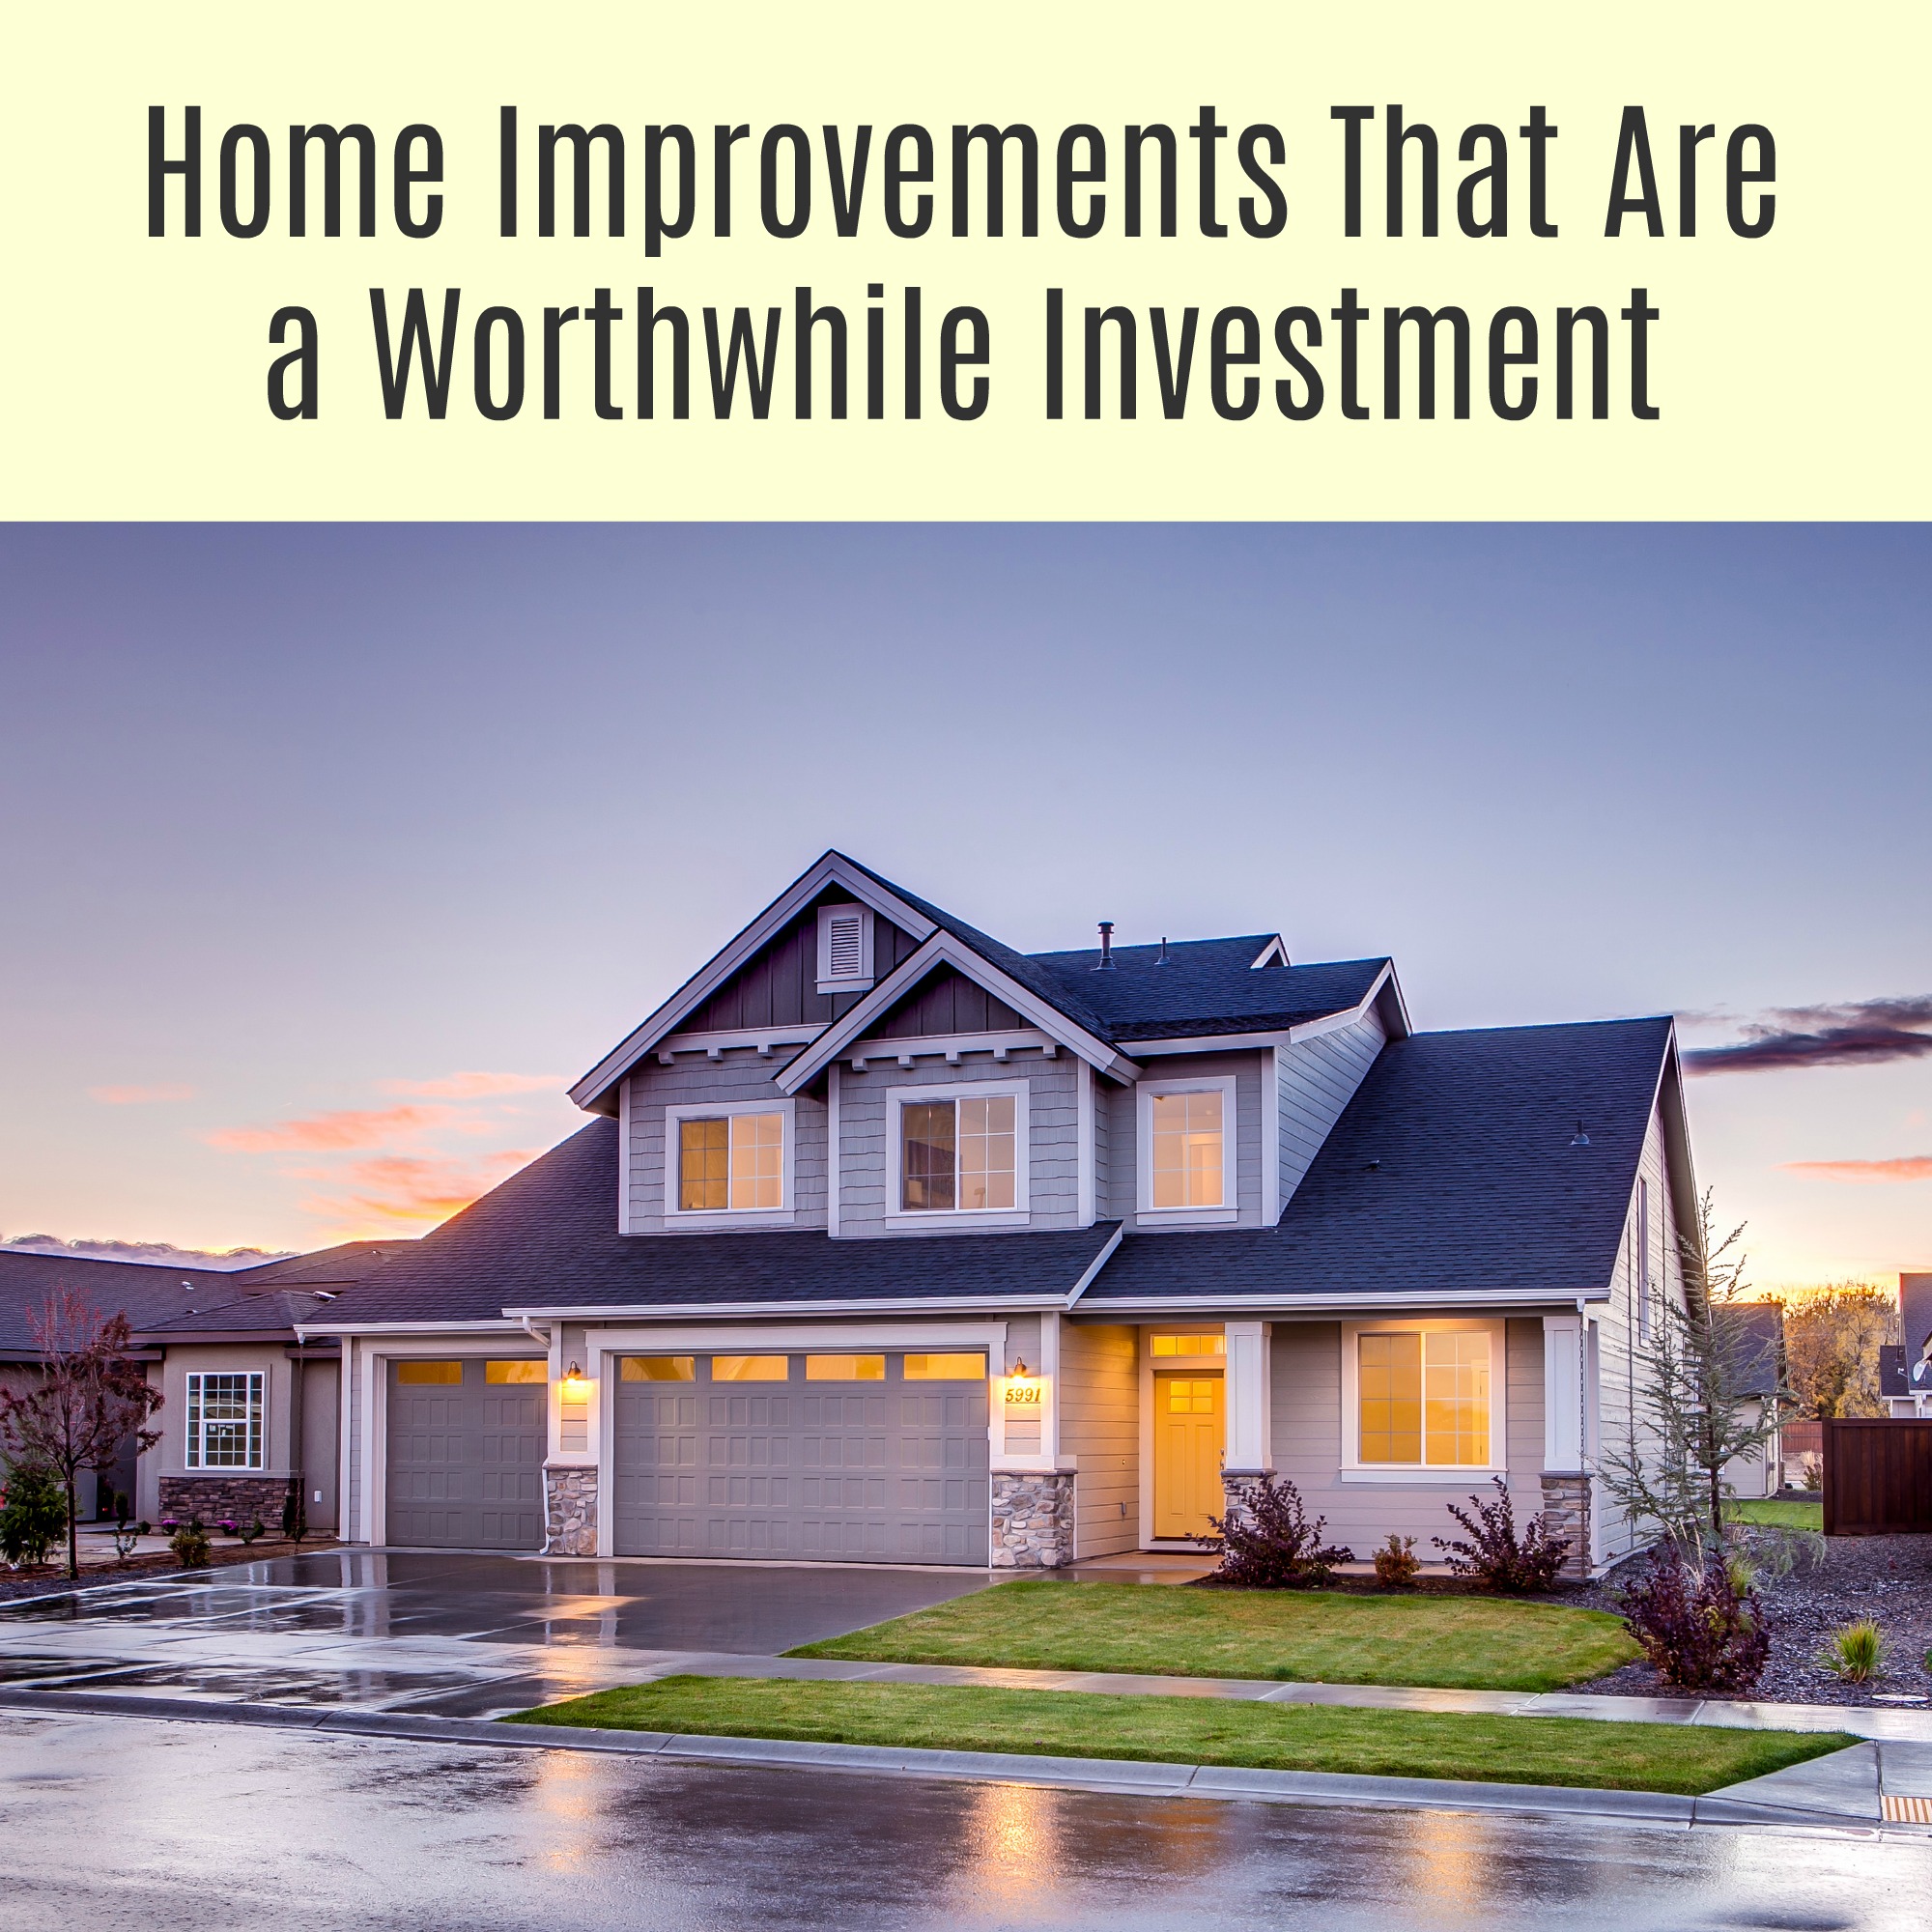 Home Improvements That are Worthwhile Investment